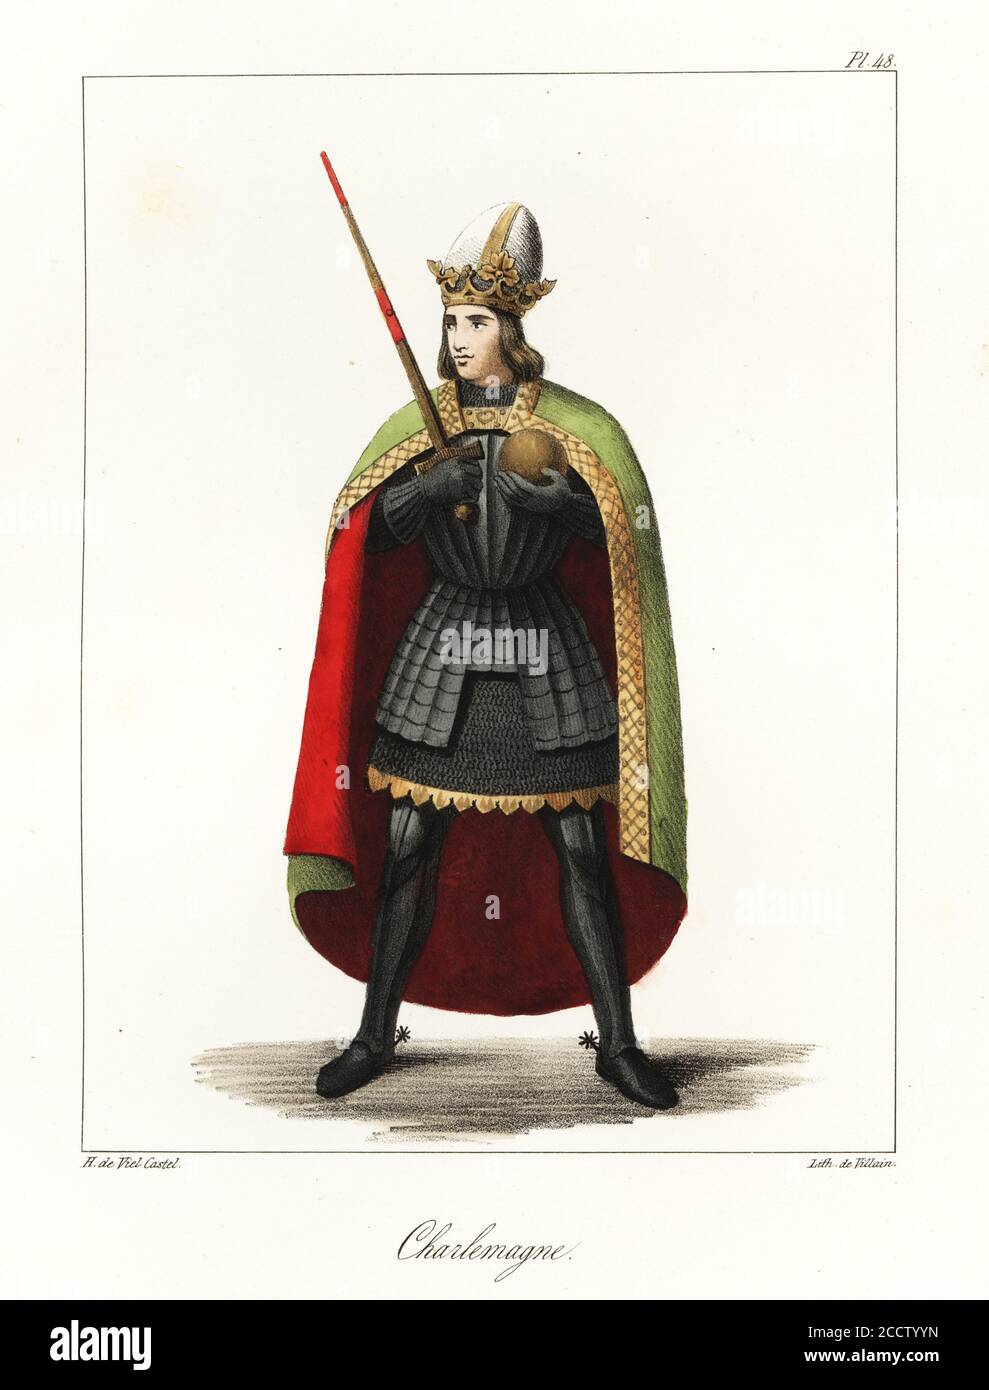 Charlemagne or Charles the Great, King of the Franks, Emperor of the Romans, 748-814. In crown with sword and orb, wearing a chlamys over a suit of armour, tunic, spurs. Handcoloured lithograph by Villain after an illustration by Horace de Viel-Castel from his Collection des costumes, armes et meubles pour servir à l'histoire de la France (Collection of costumes, weapons and furniture to be used in the history of France), Treuttel & Wurtz, Bossange, 1827. Stock Photo